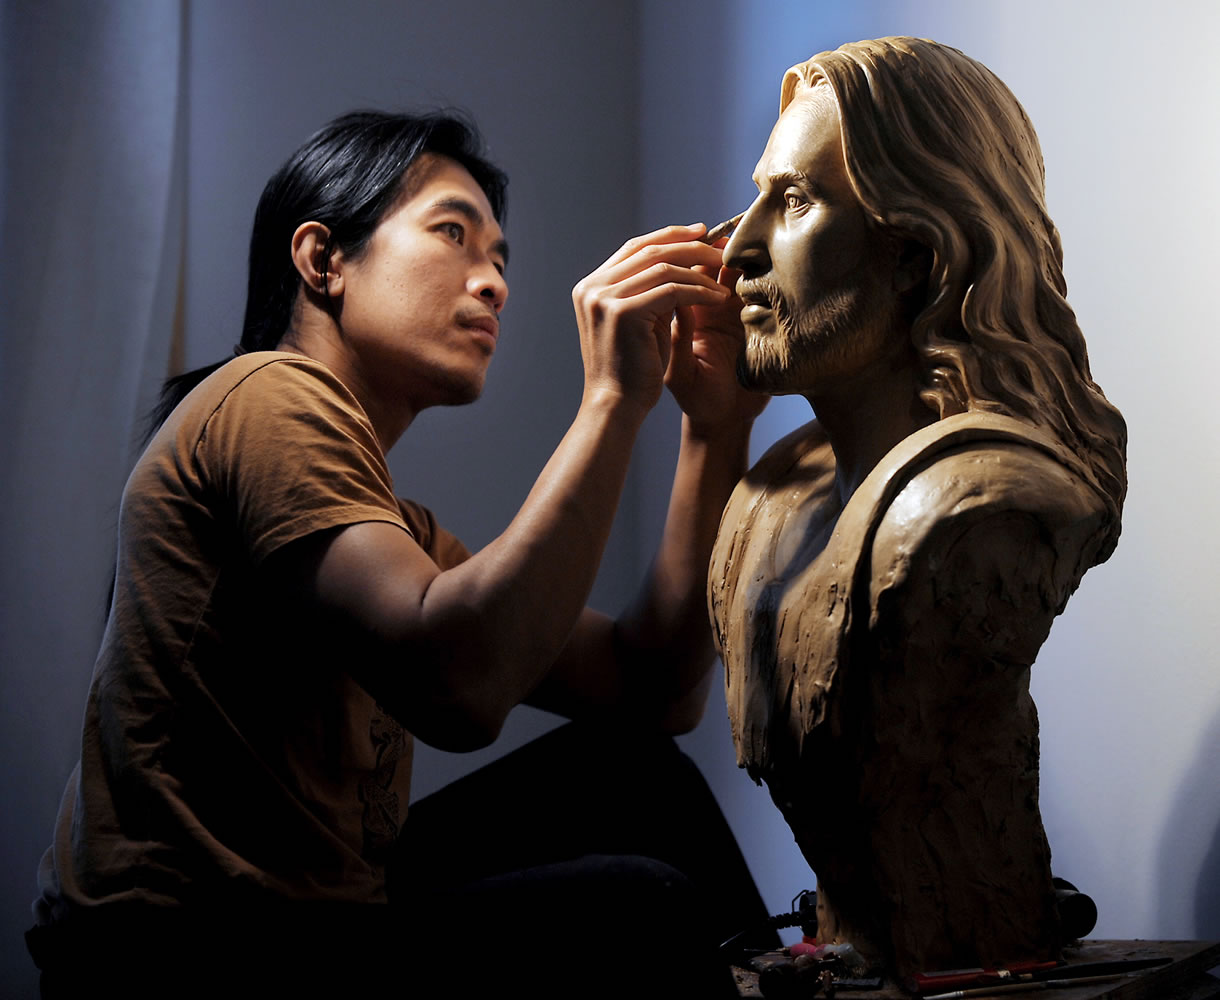 Sunti Pichetchaiyakul of Bigfork, Mont., works in his studio in 2011 on a wax sculpture of Jesus Christ based on the Shroud of Turin.